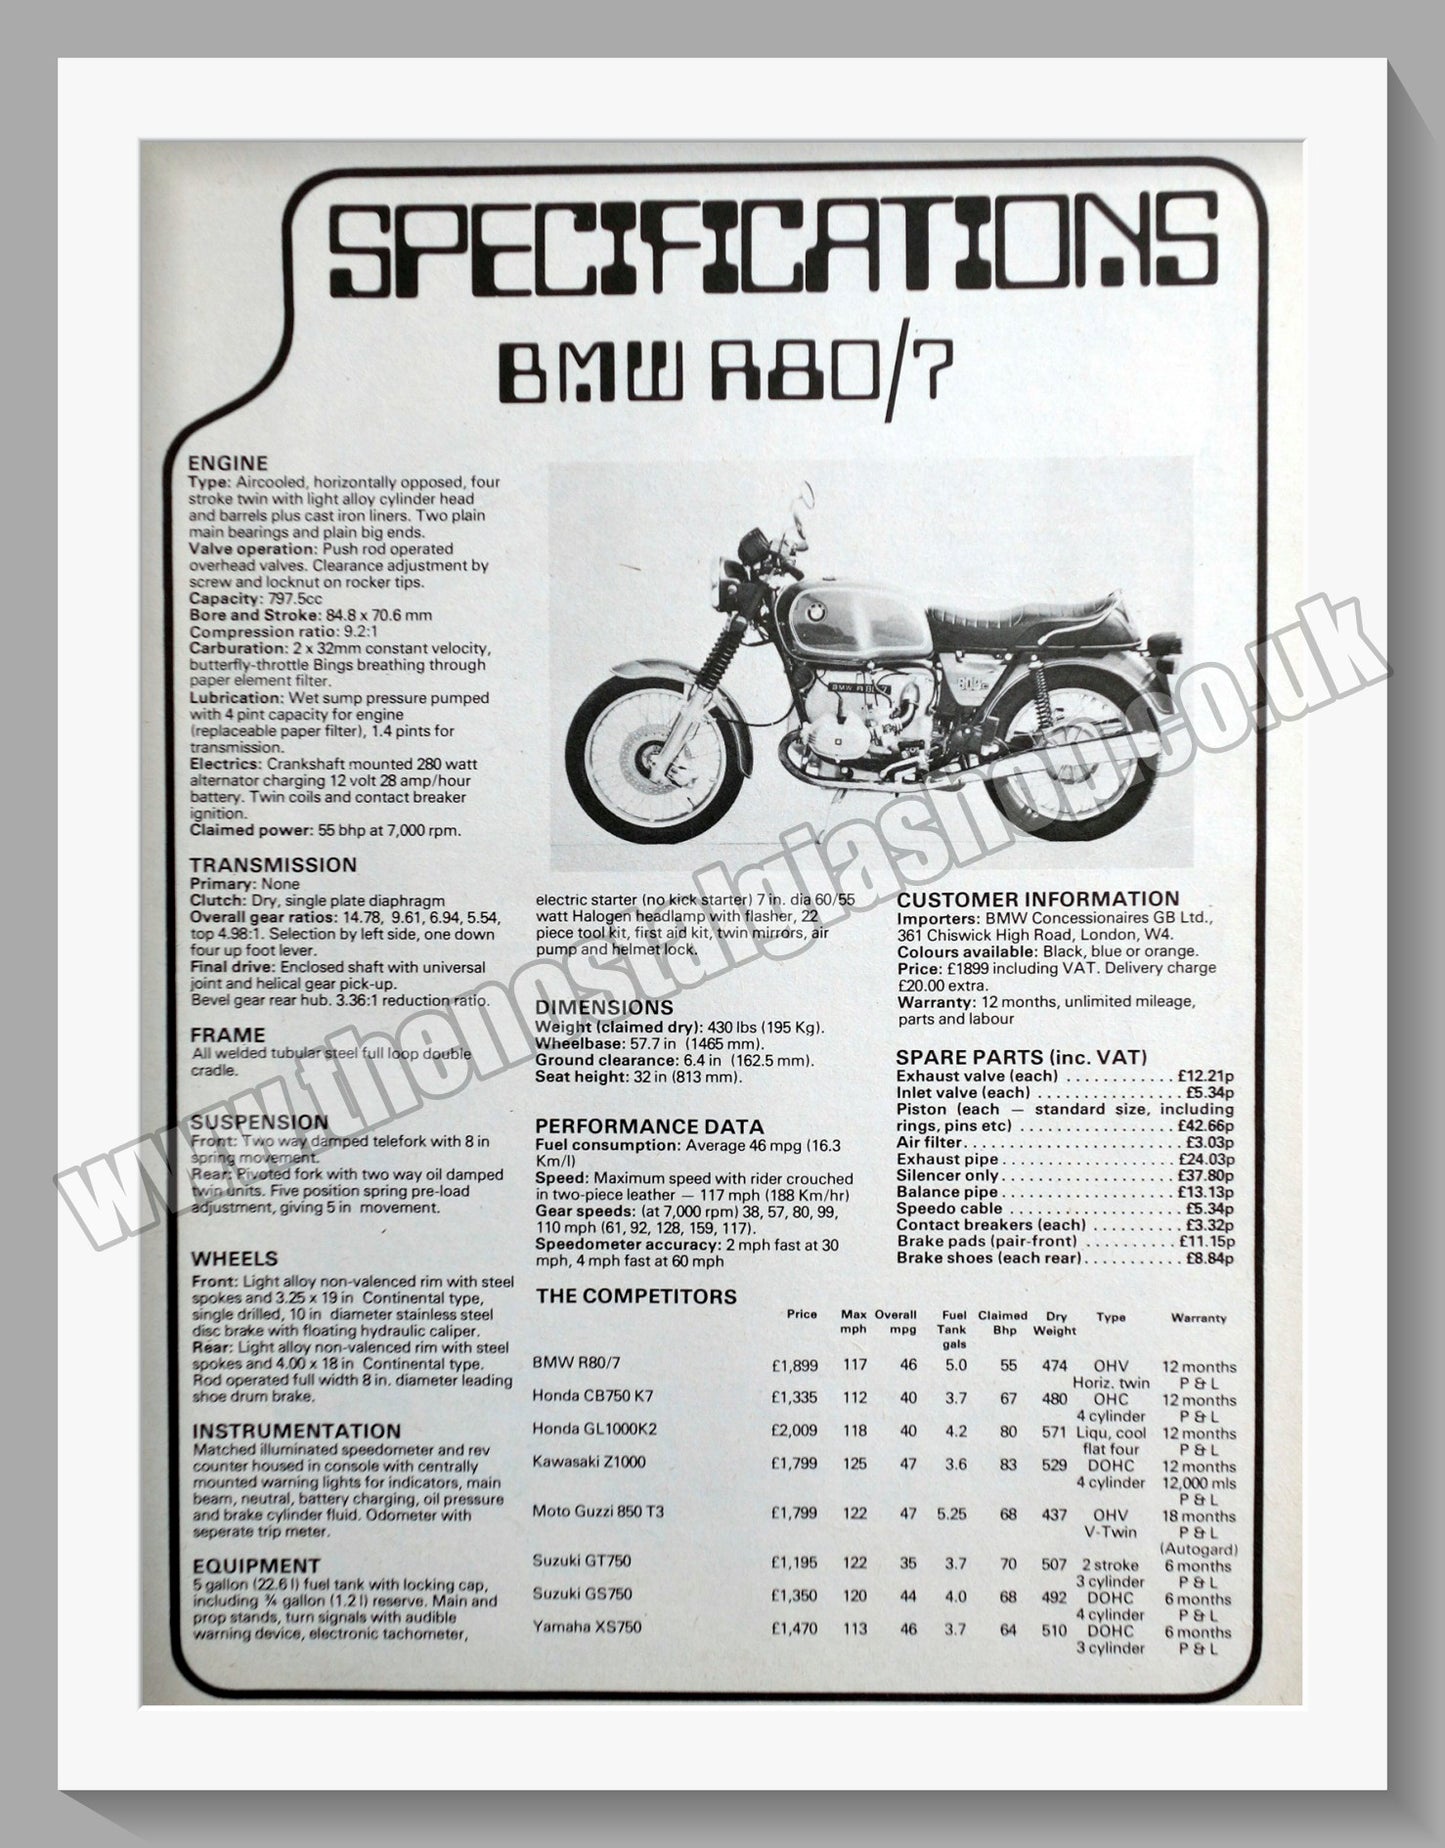 BMW R80 Motorcycle. Specifications Sheet. 1978 Original Advert (ref AD58389)